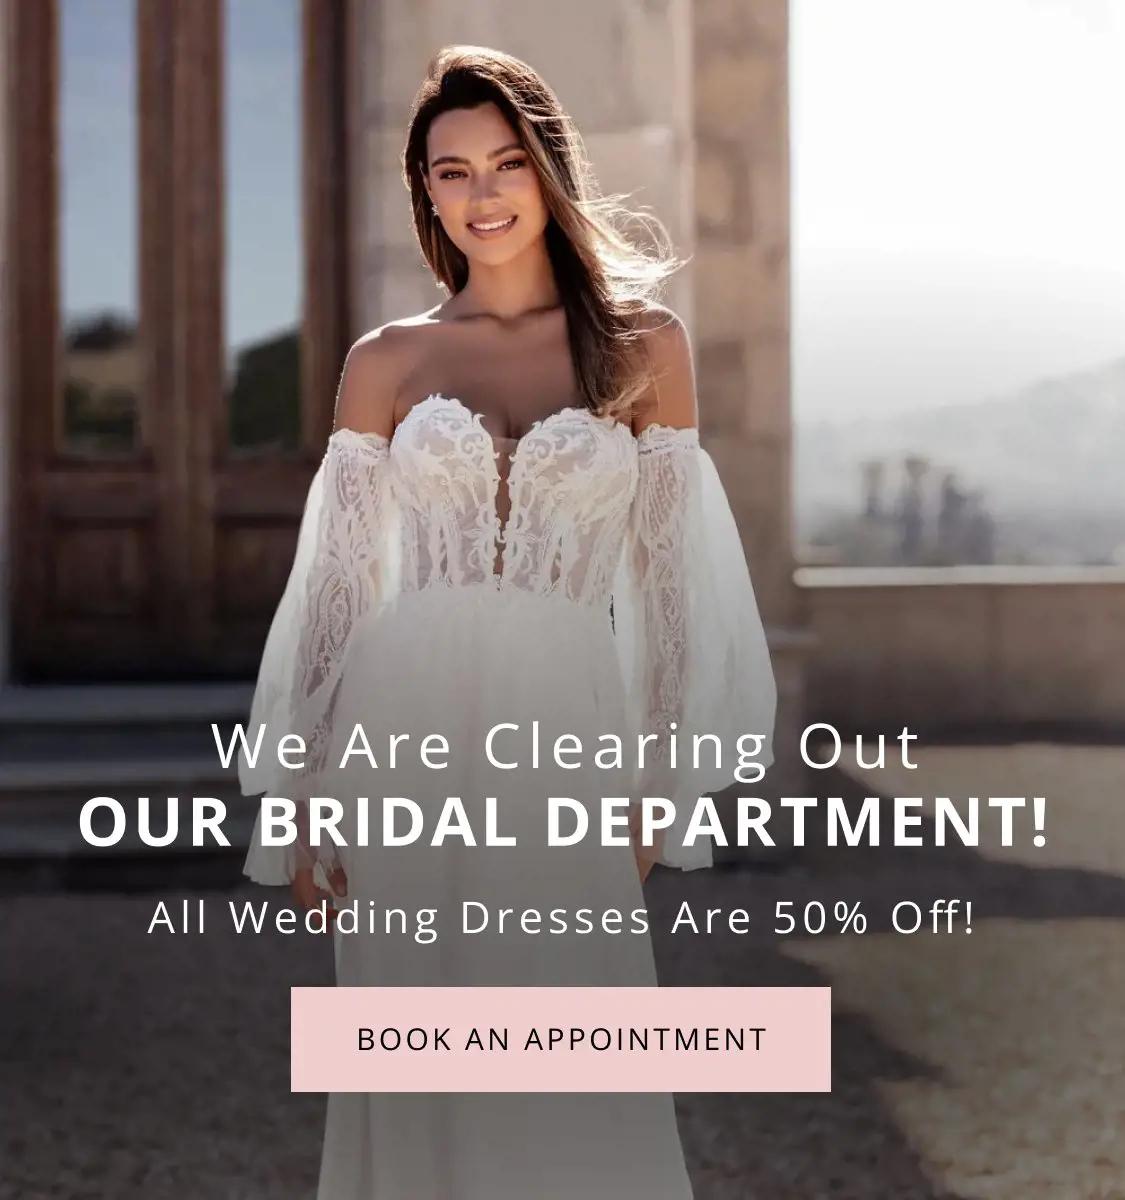 Banner Promoting 50% Off On All Bridal Dresses